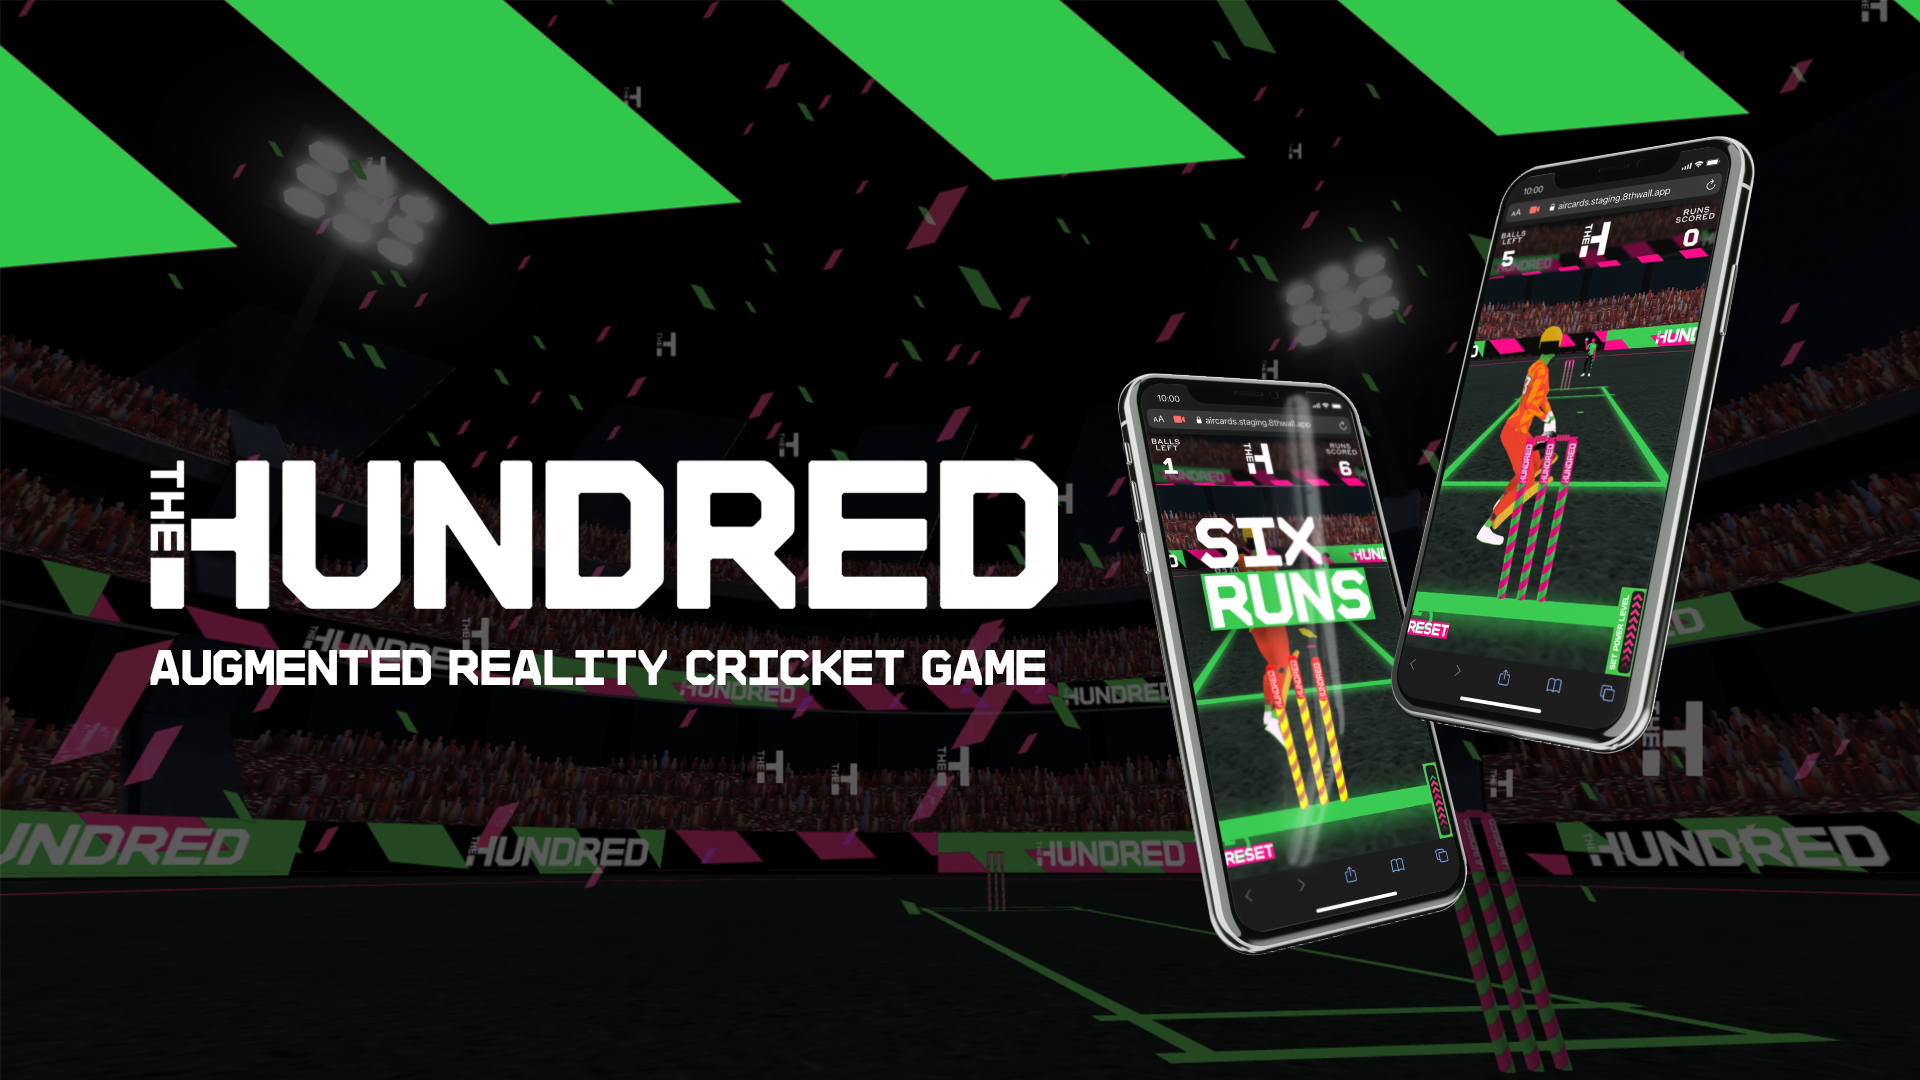 Industry-first WebAR cricket game promotes the launch of The Hundred tournament